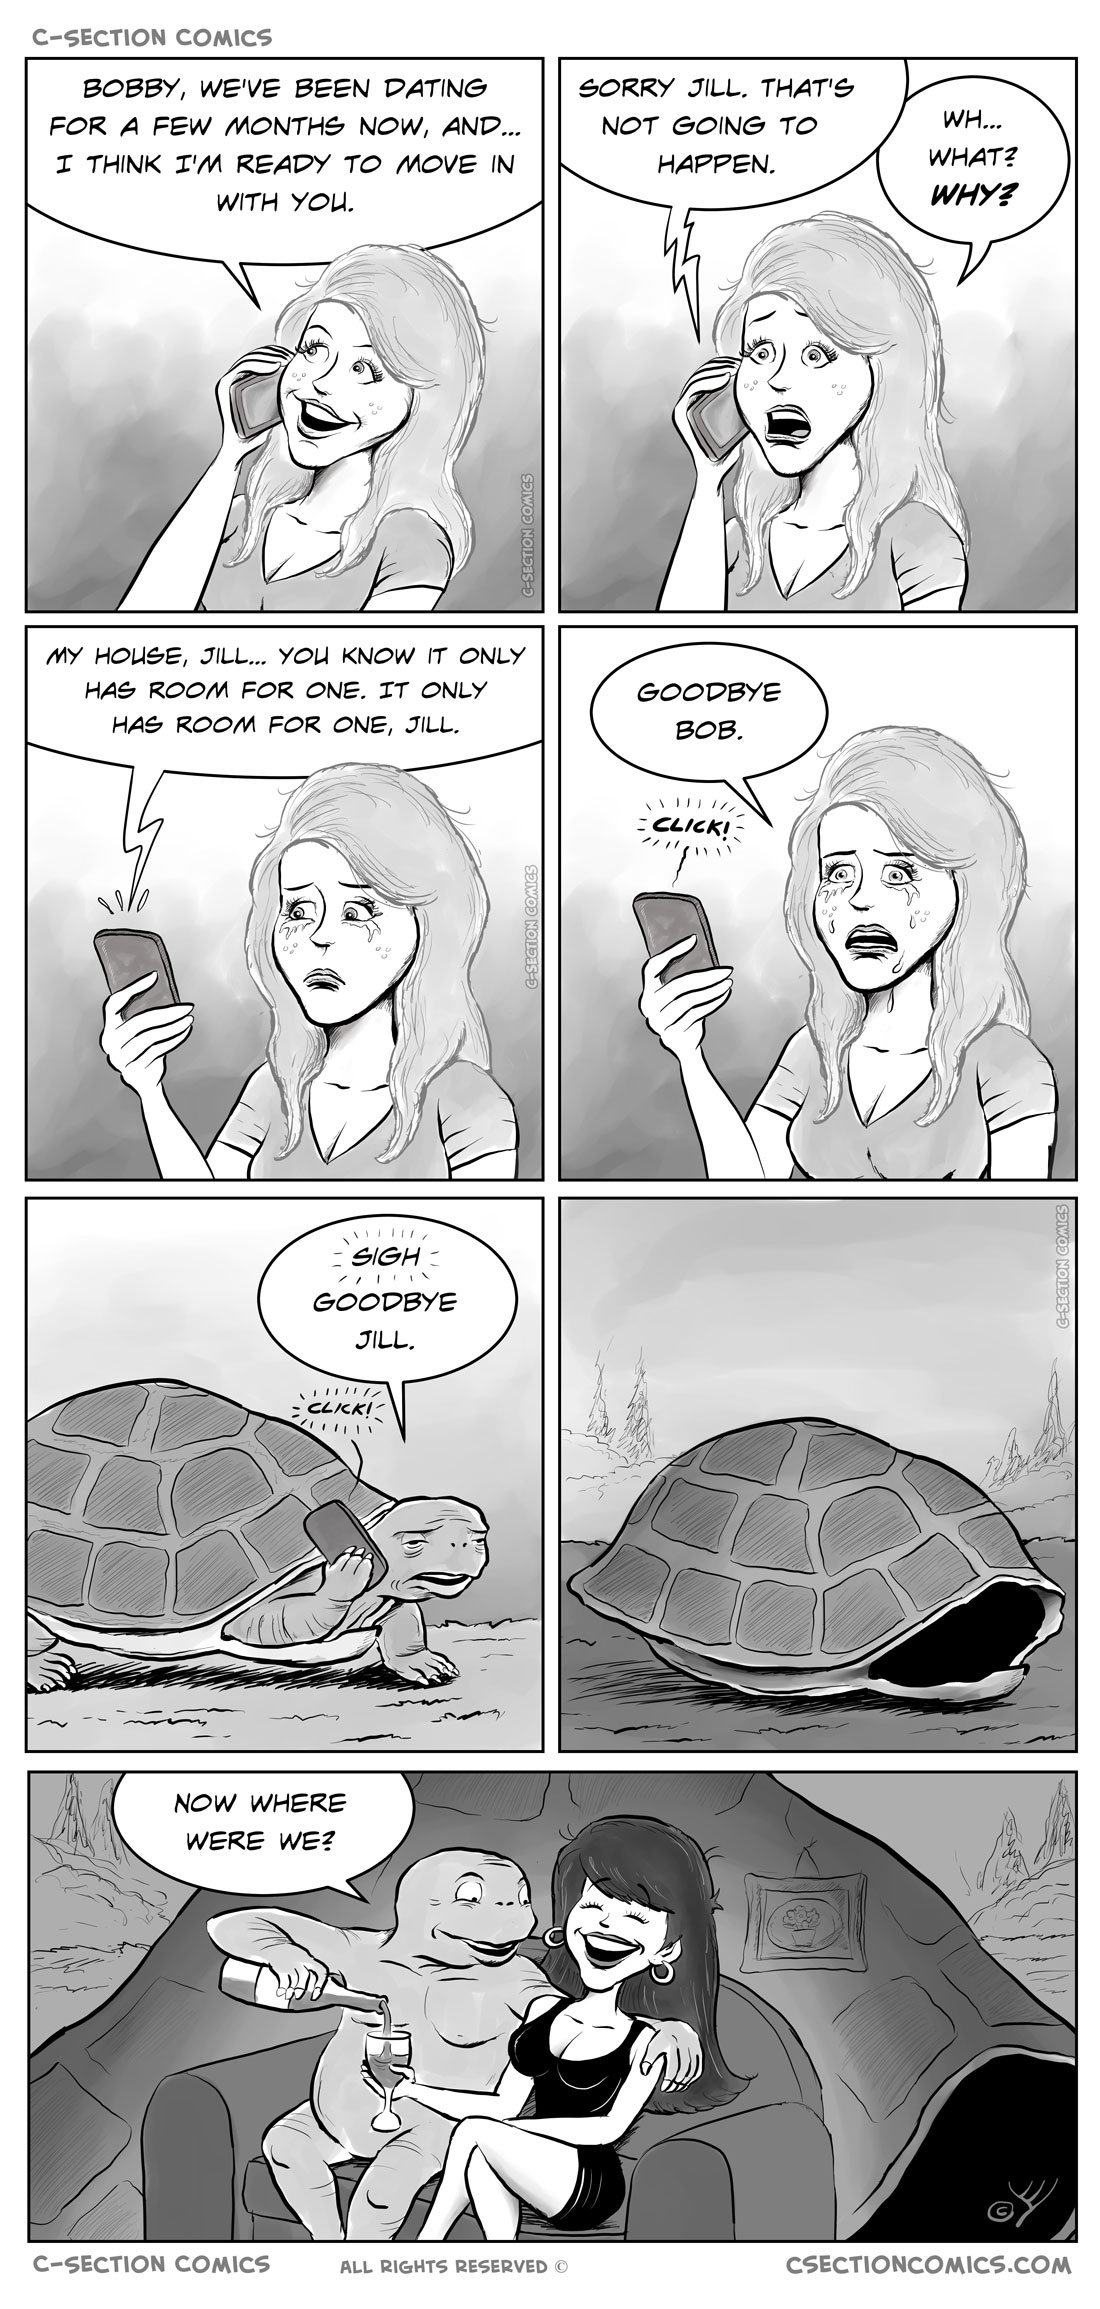 This would be an excellent place for a turtle pun, but they're all so shell-o. 